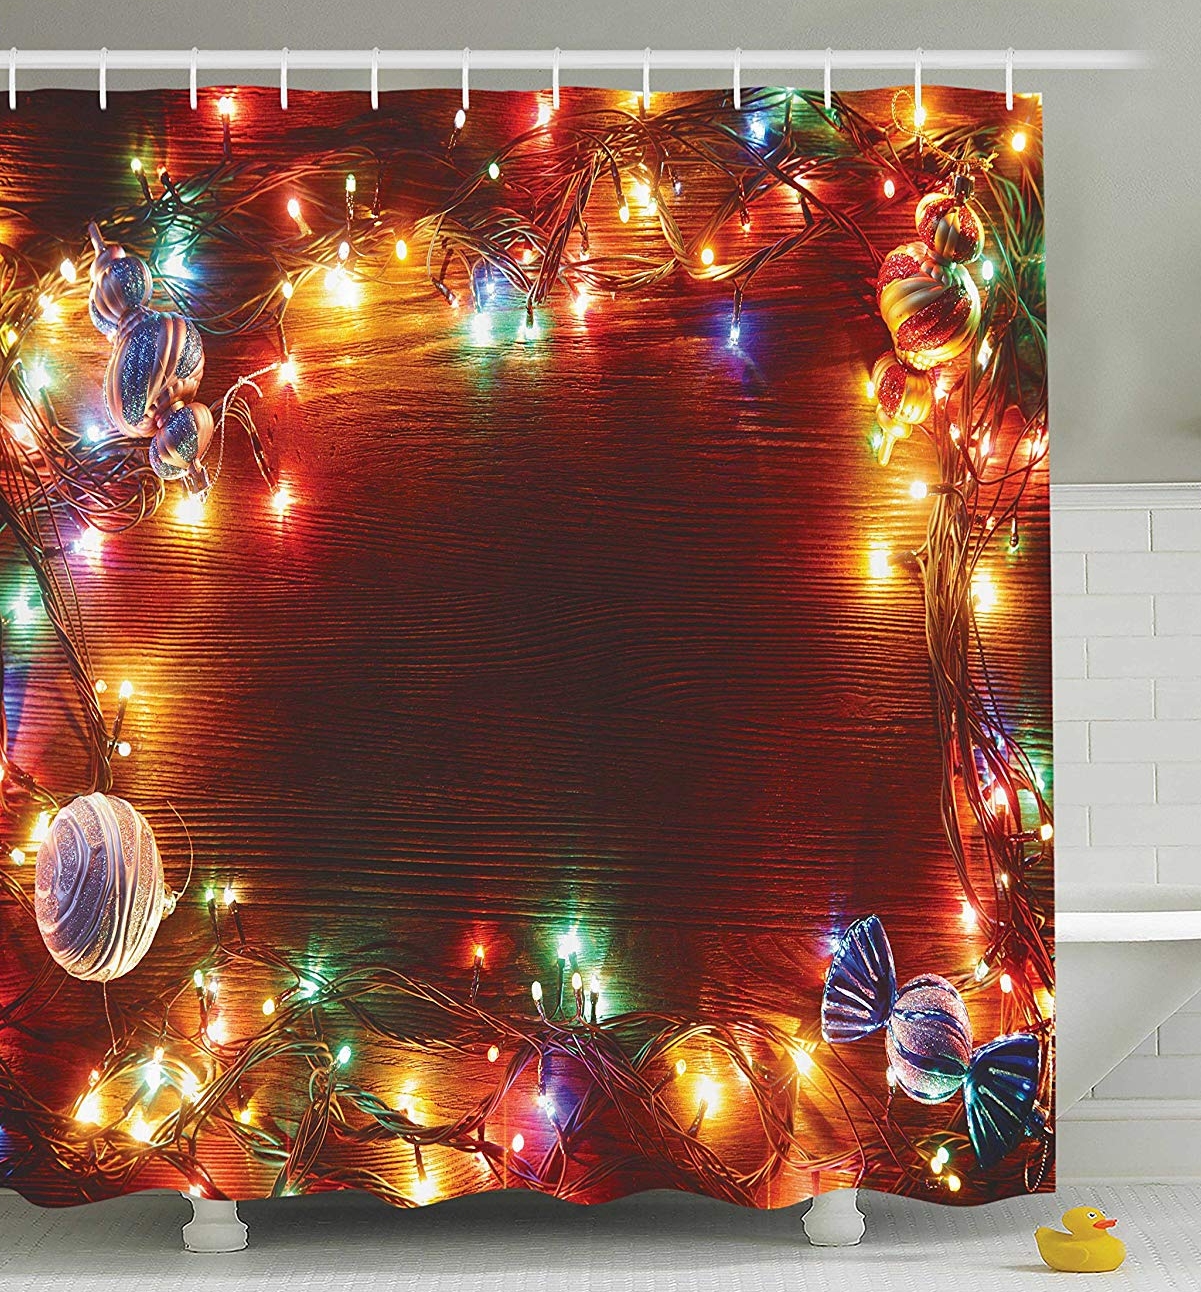 Ambesonne Christmas Shower Curtain